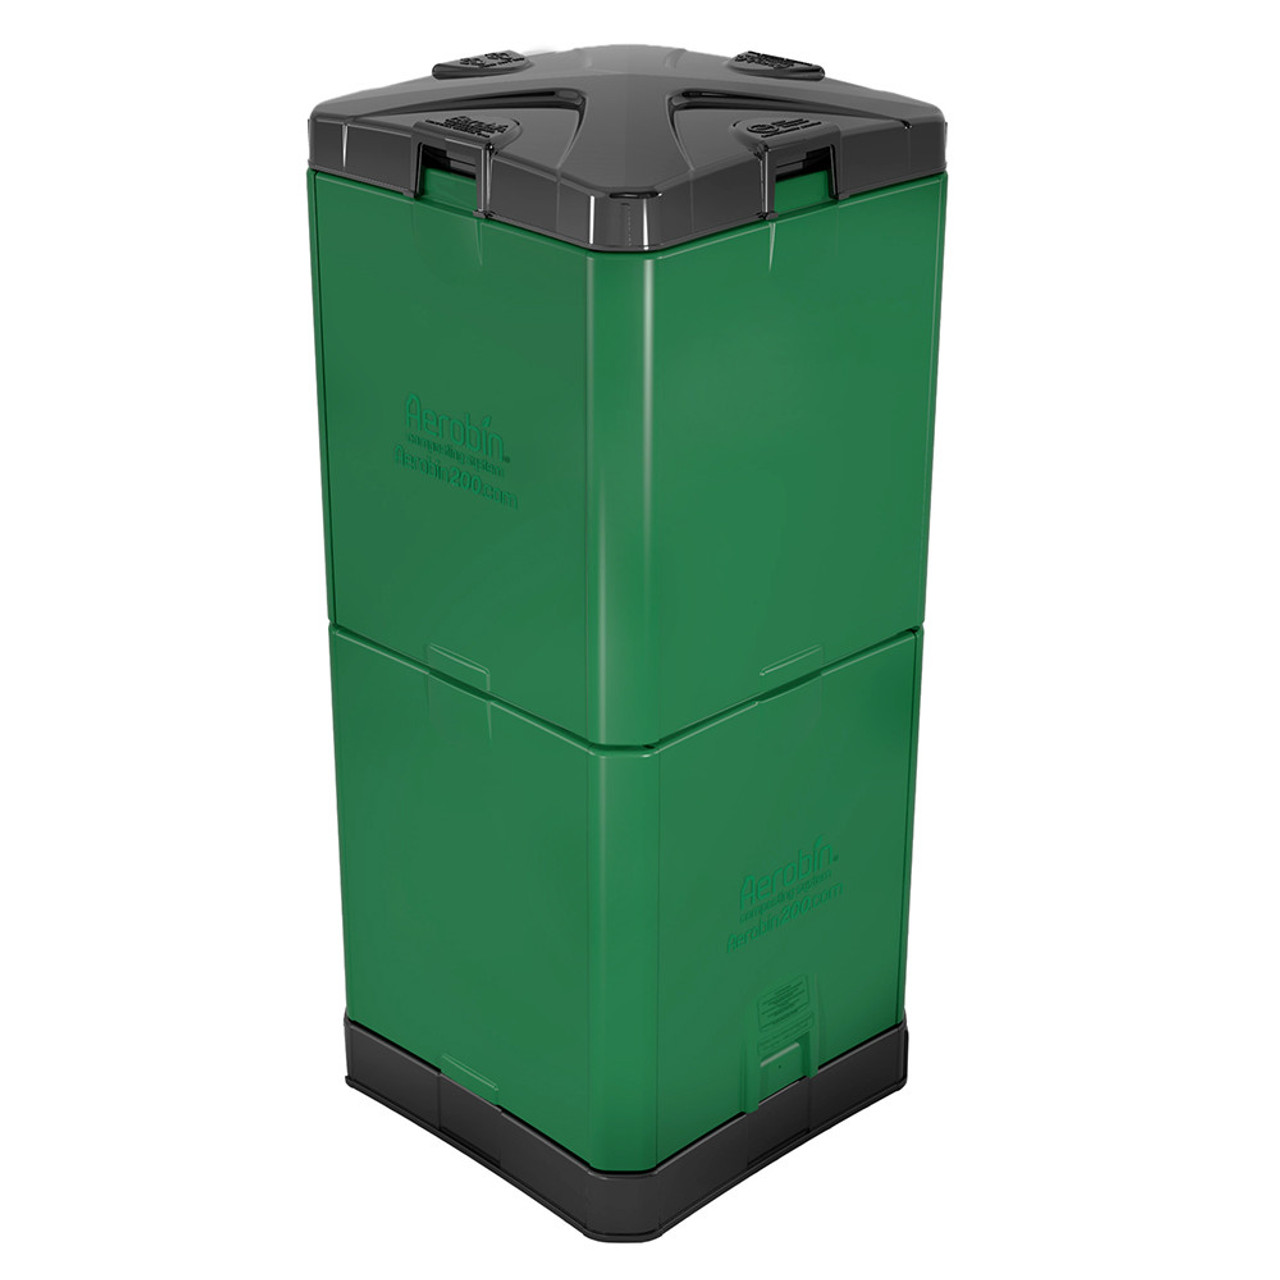 Steel compost bin with charcoal filter, 7 litres, green